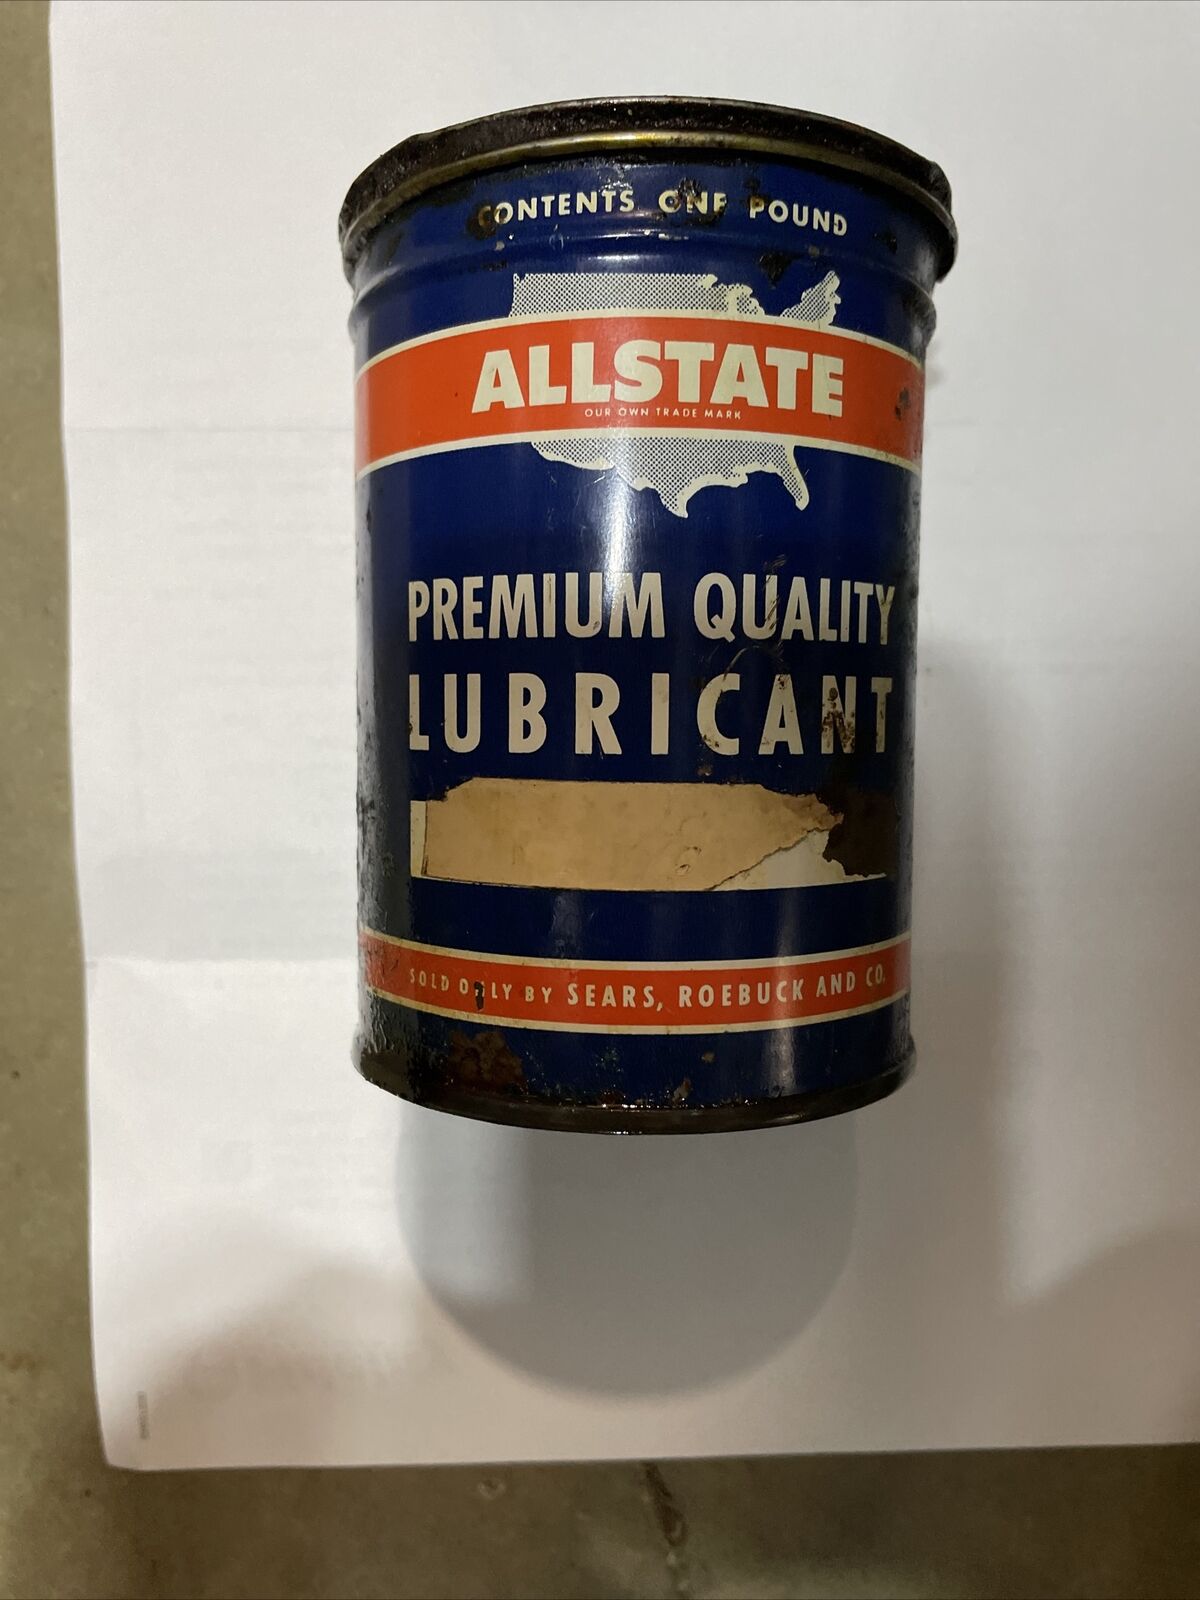 Vintage ALLSTATE Premium Quality Lubricant Can, Vintage 1950’s.